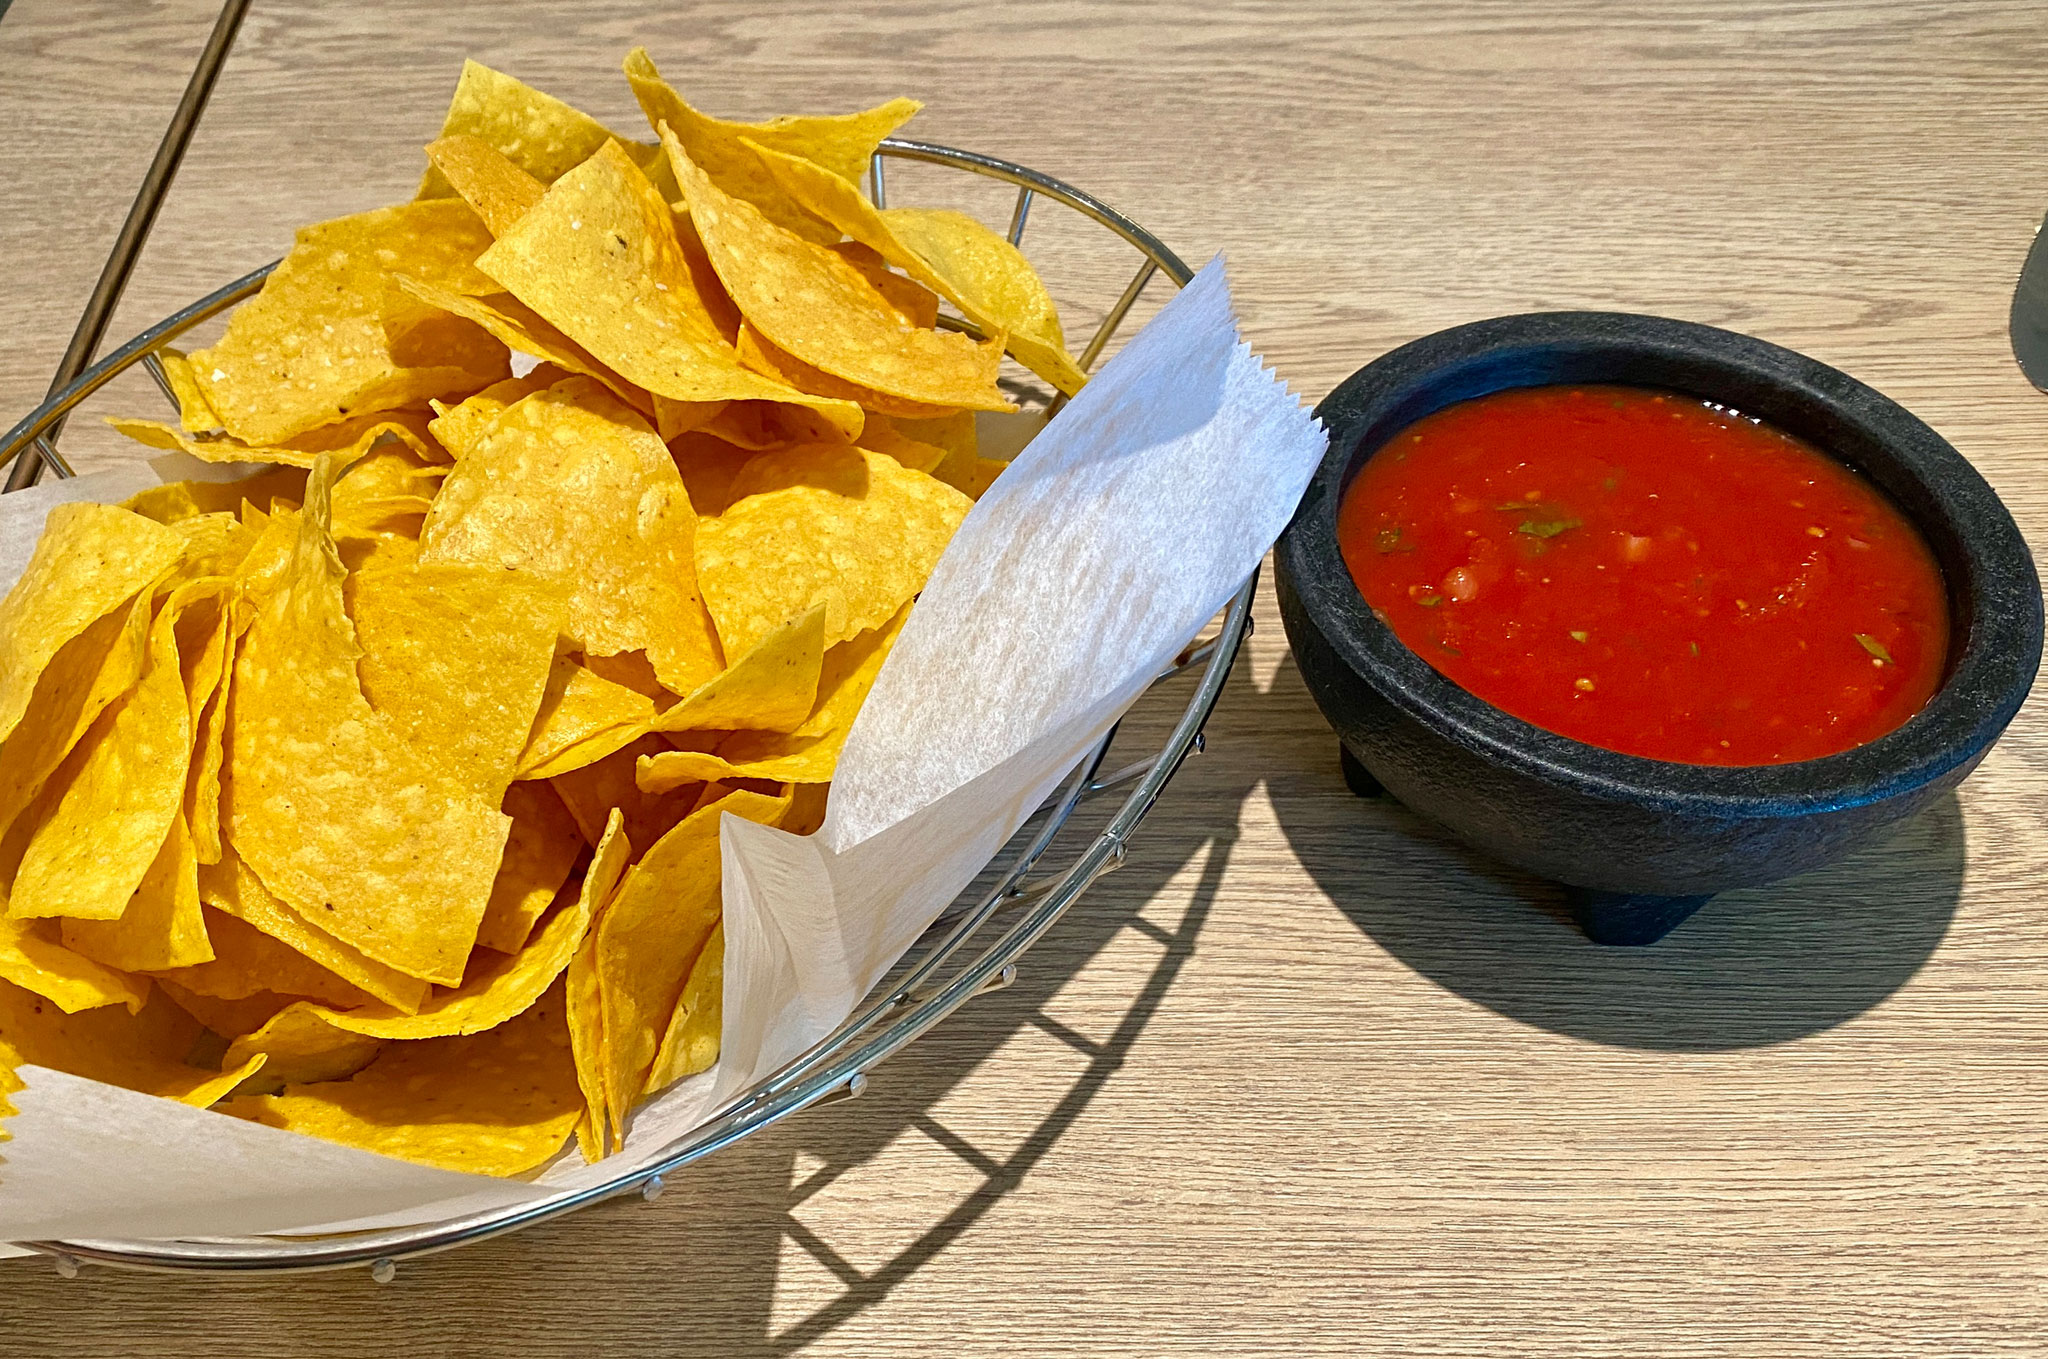 Housemade Chips and Salsa